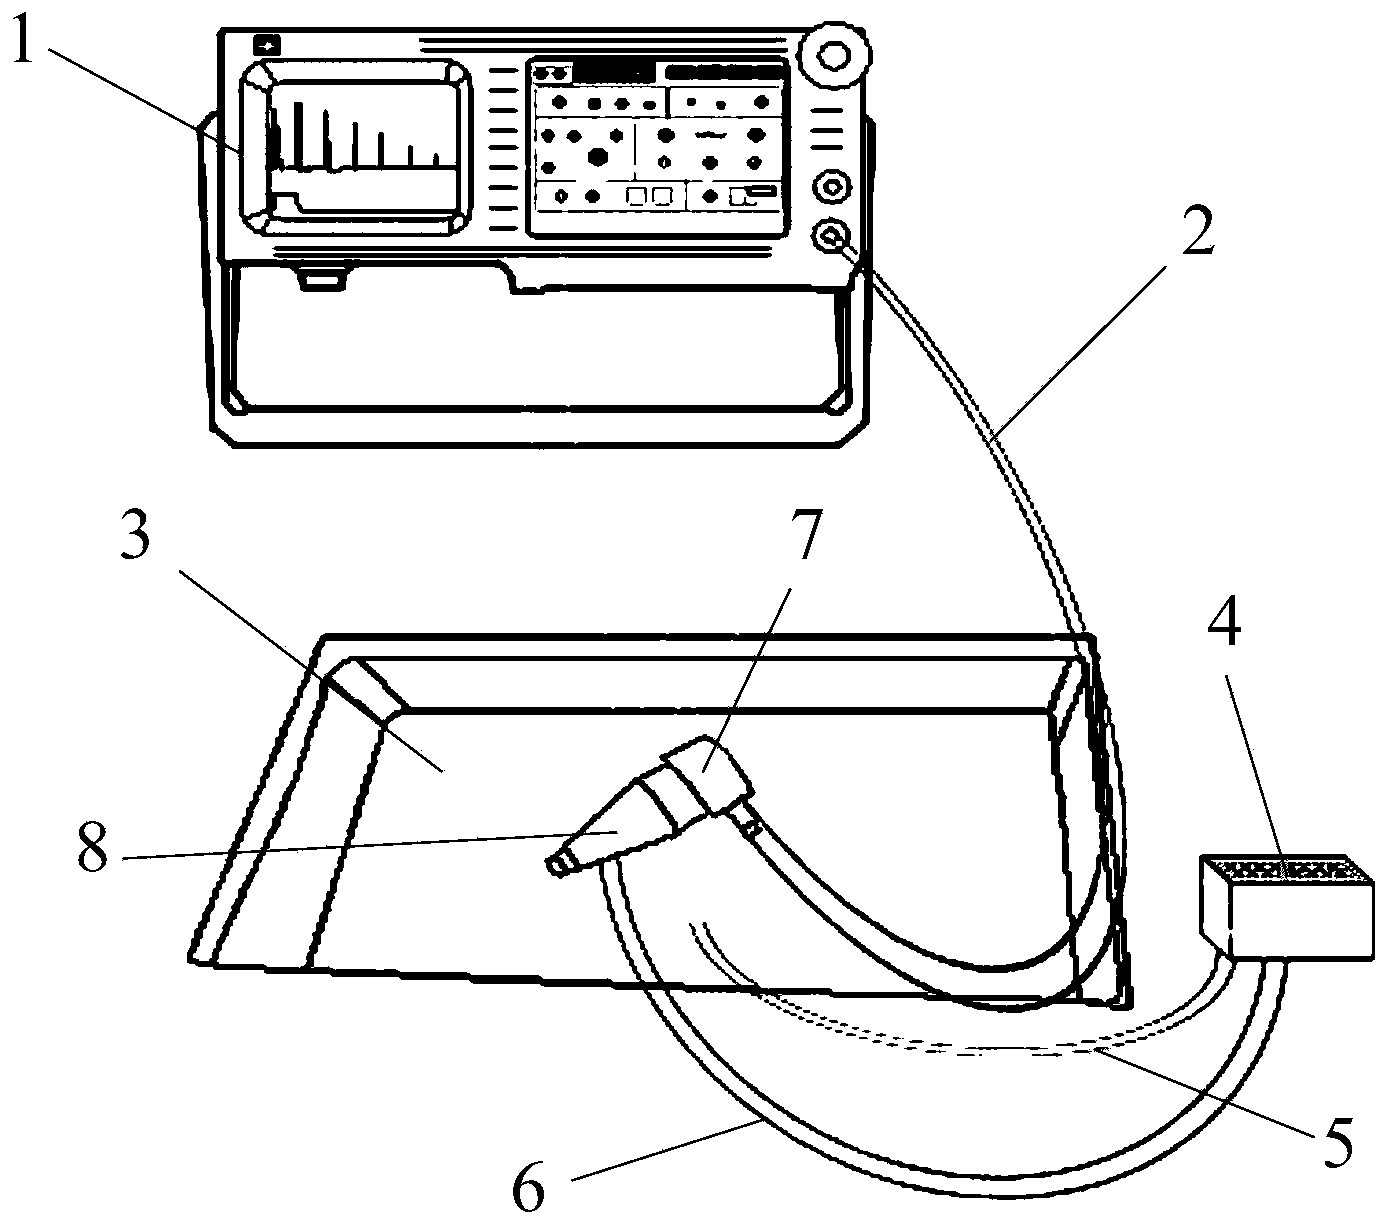 Device and method for ultrasonic testing of engine fuel oil header pipe soldered joints